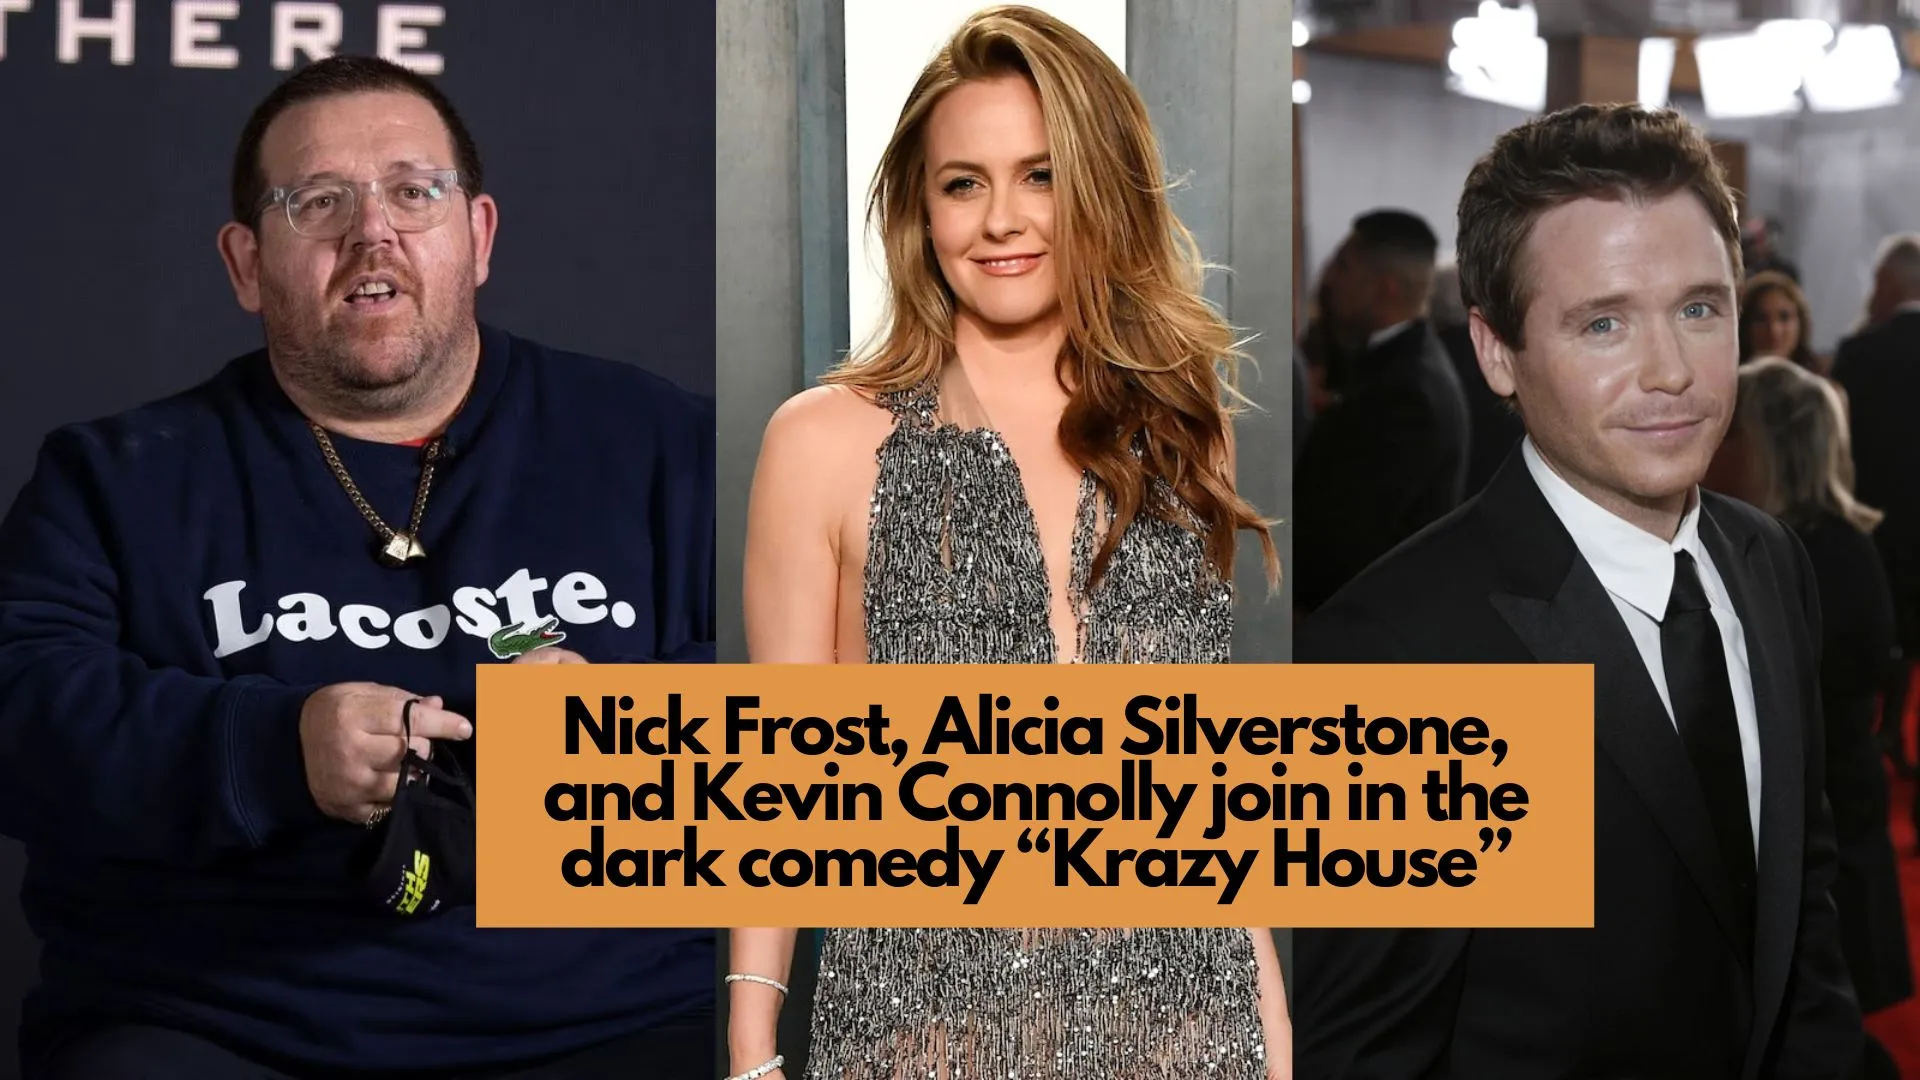 Nick Frost, Alicia Silverstone, and Kevin Connolly join in the dark comedy “Krazy House”